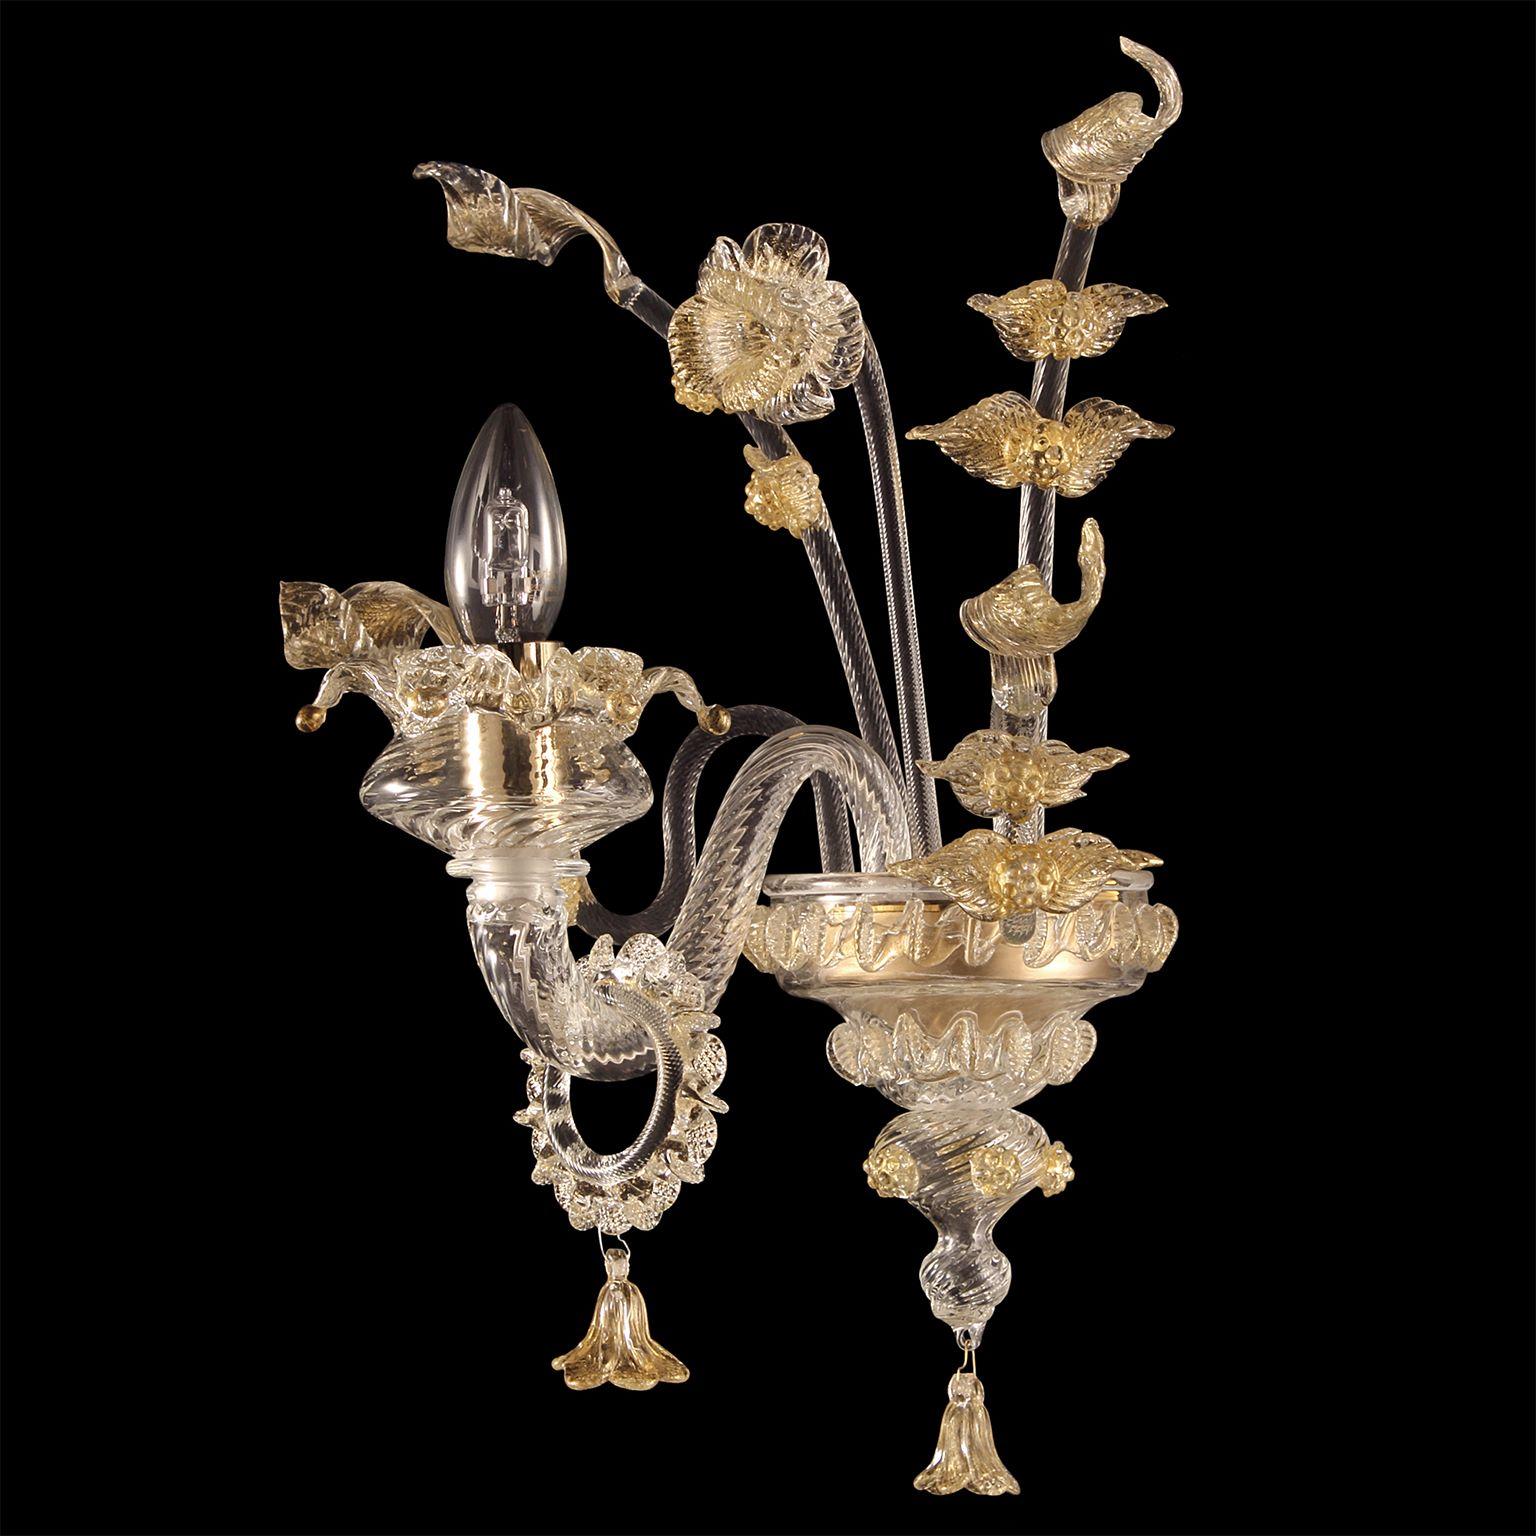 Rich Murano sconce 1 Arm crystal and gold murano glass Fenix by Multiforme.
The blown glass chandelier Fenix, with its floral style, harks back to the venetian classic tradition. The decorative elements are characterized by flowers modelled petal